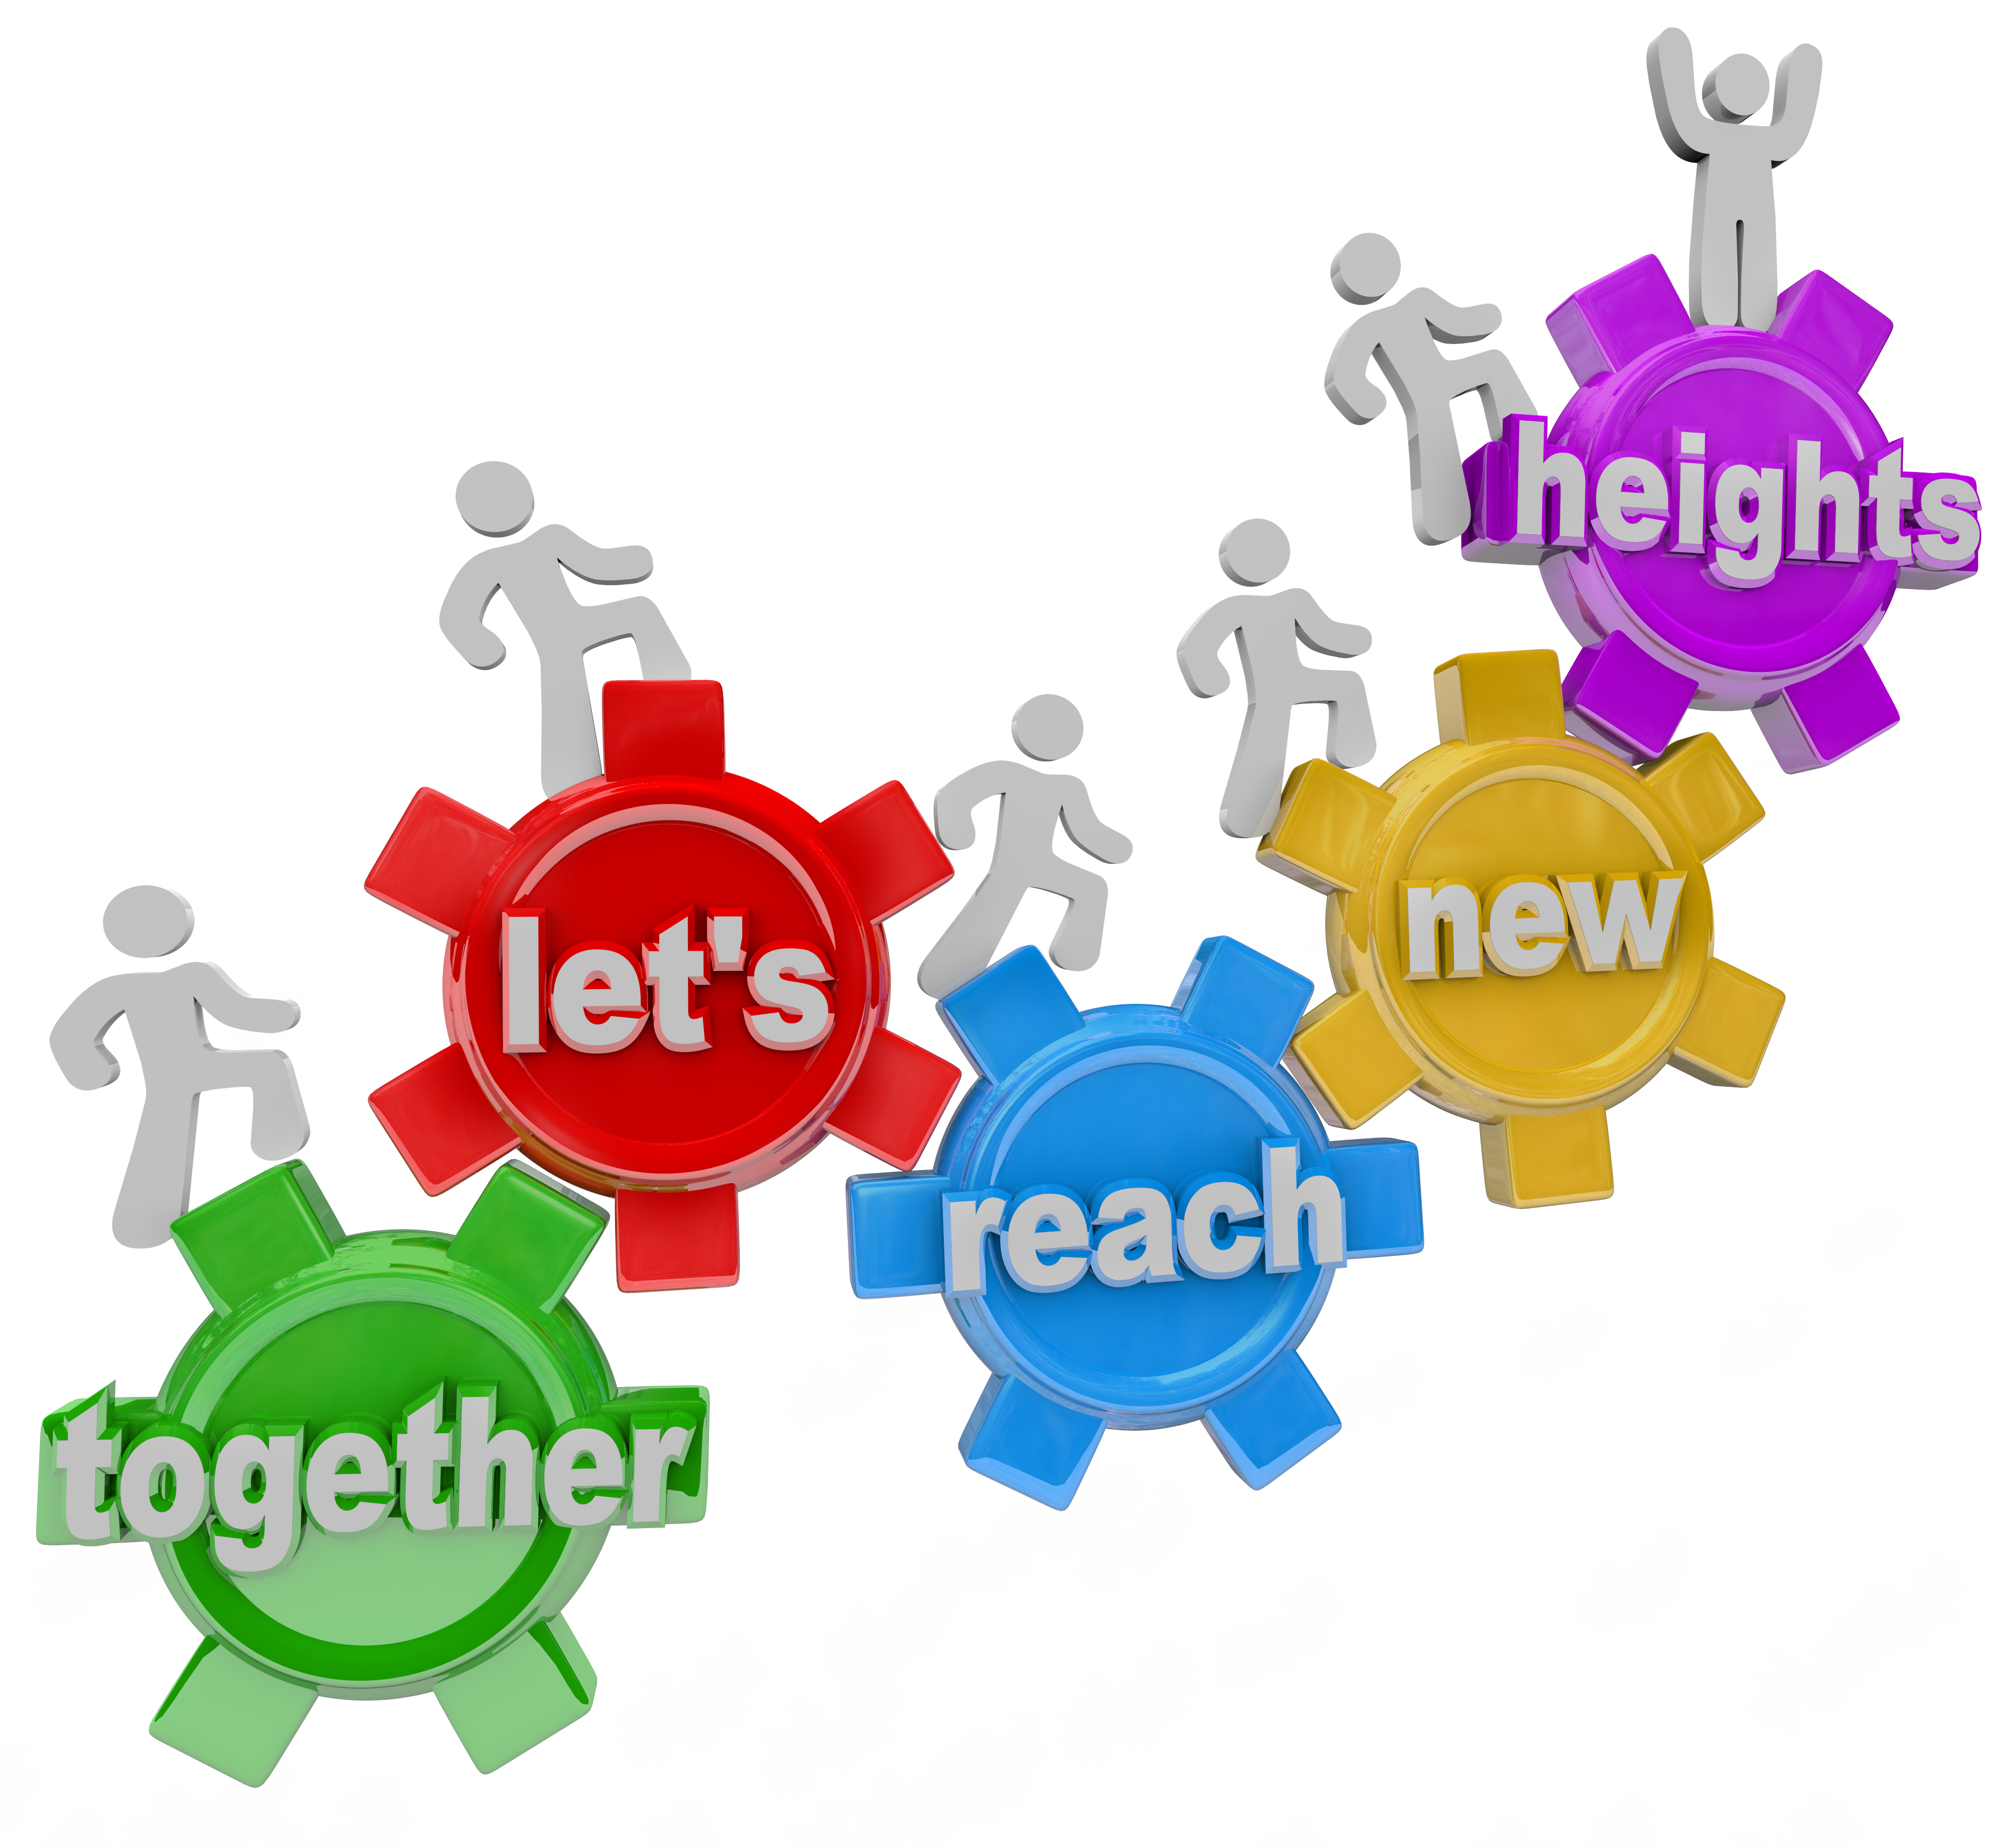 free clipart images for teamwork - photo #13